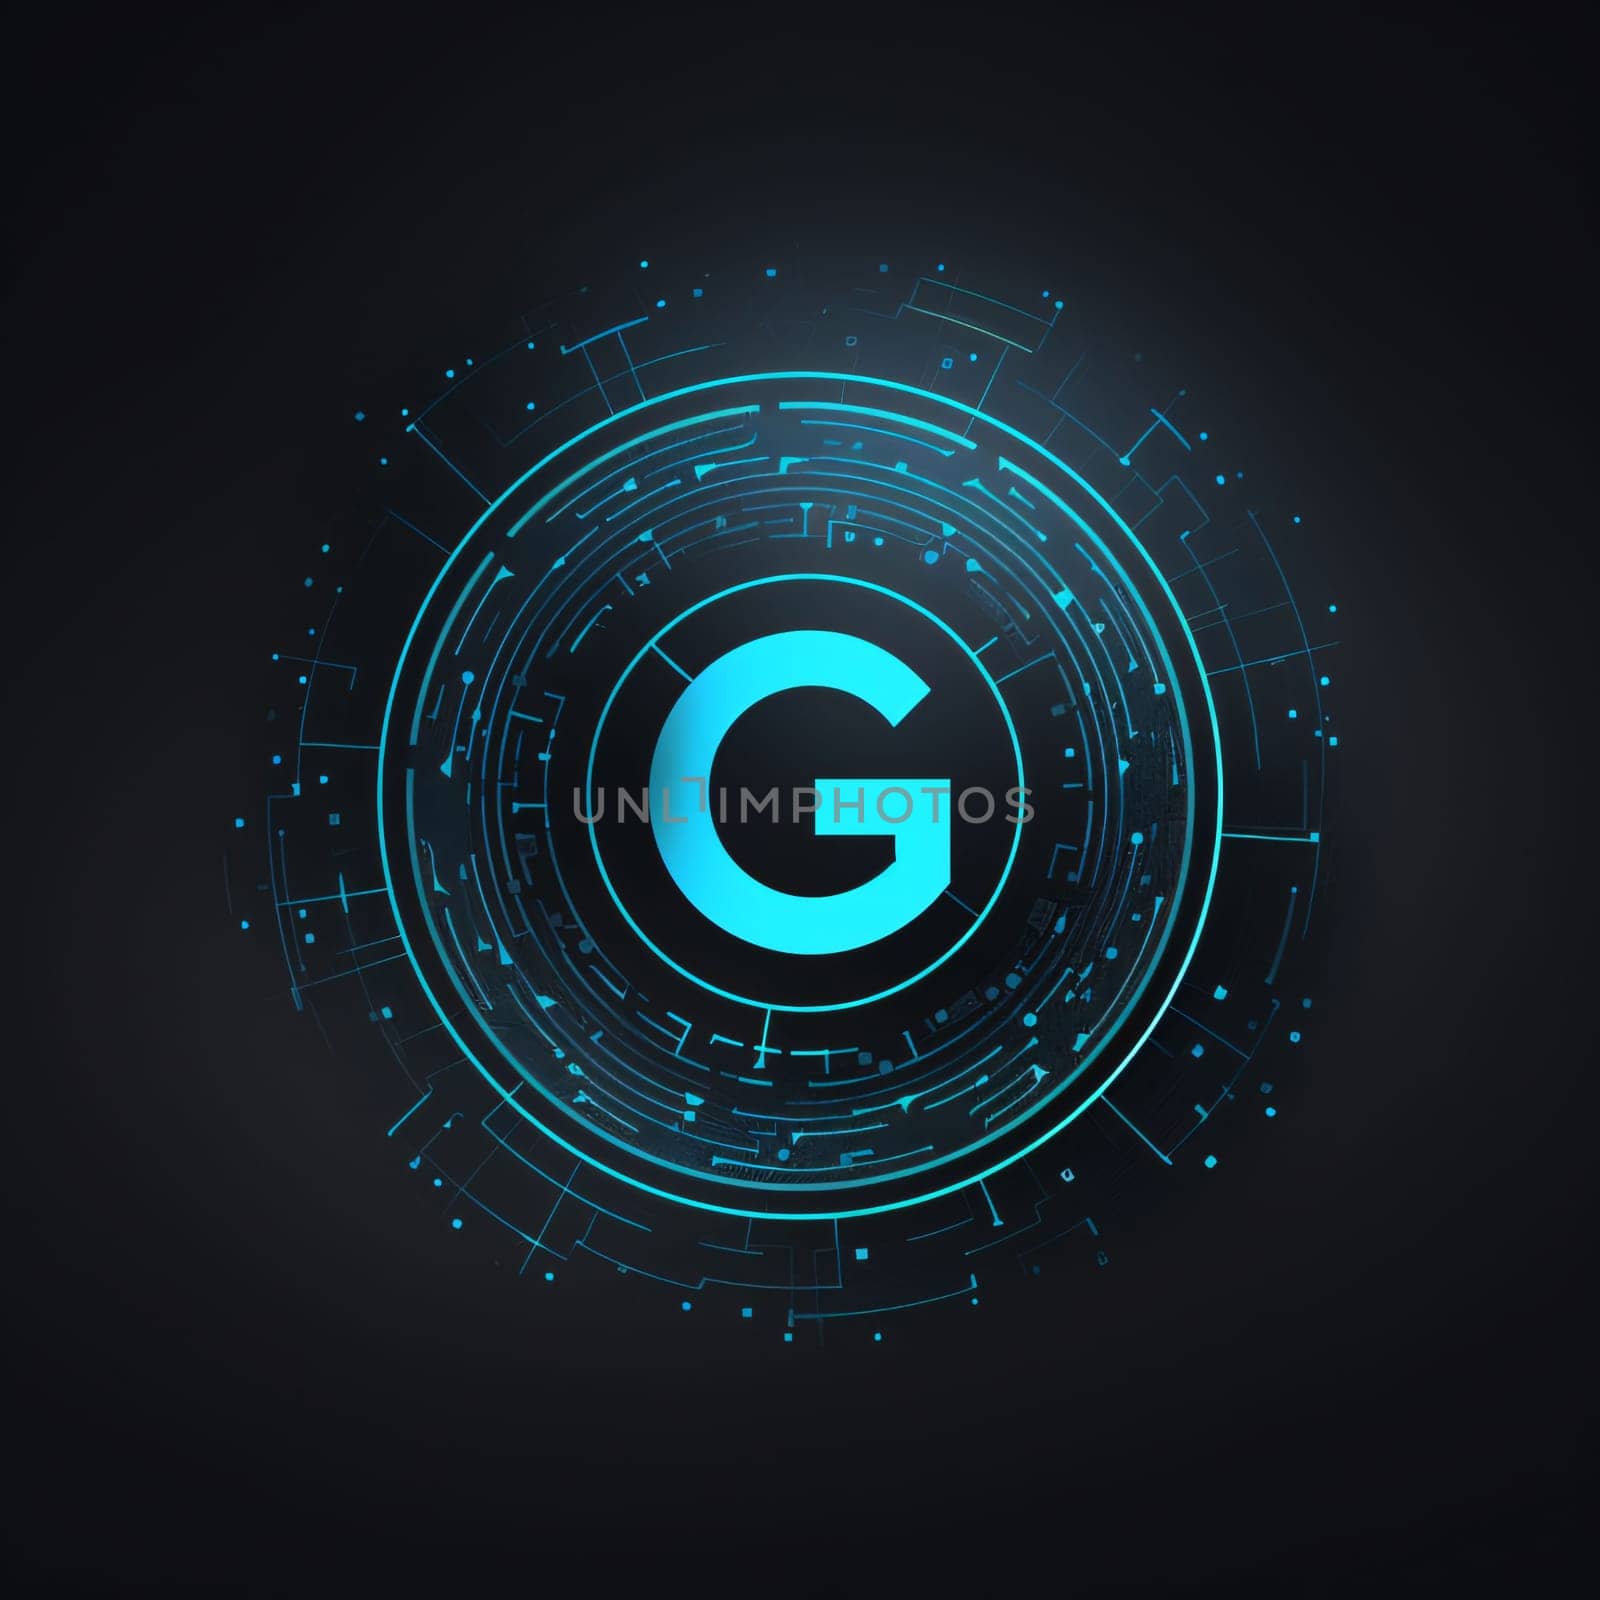 Graphic alphabet letters: Vector illustration of the letter G in the circle. Technology background.